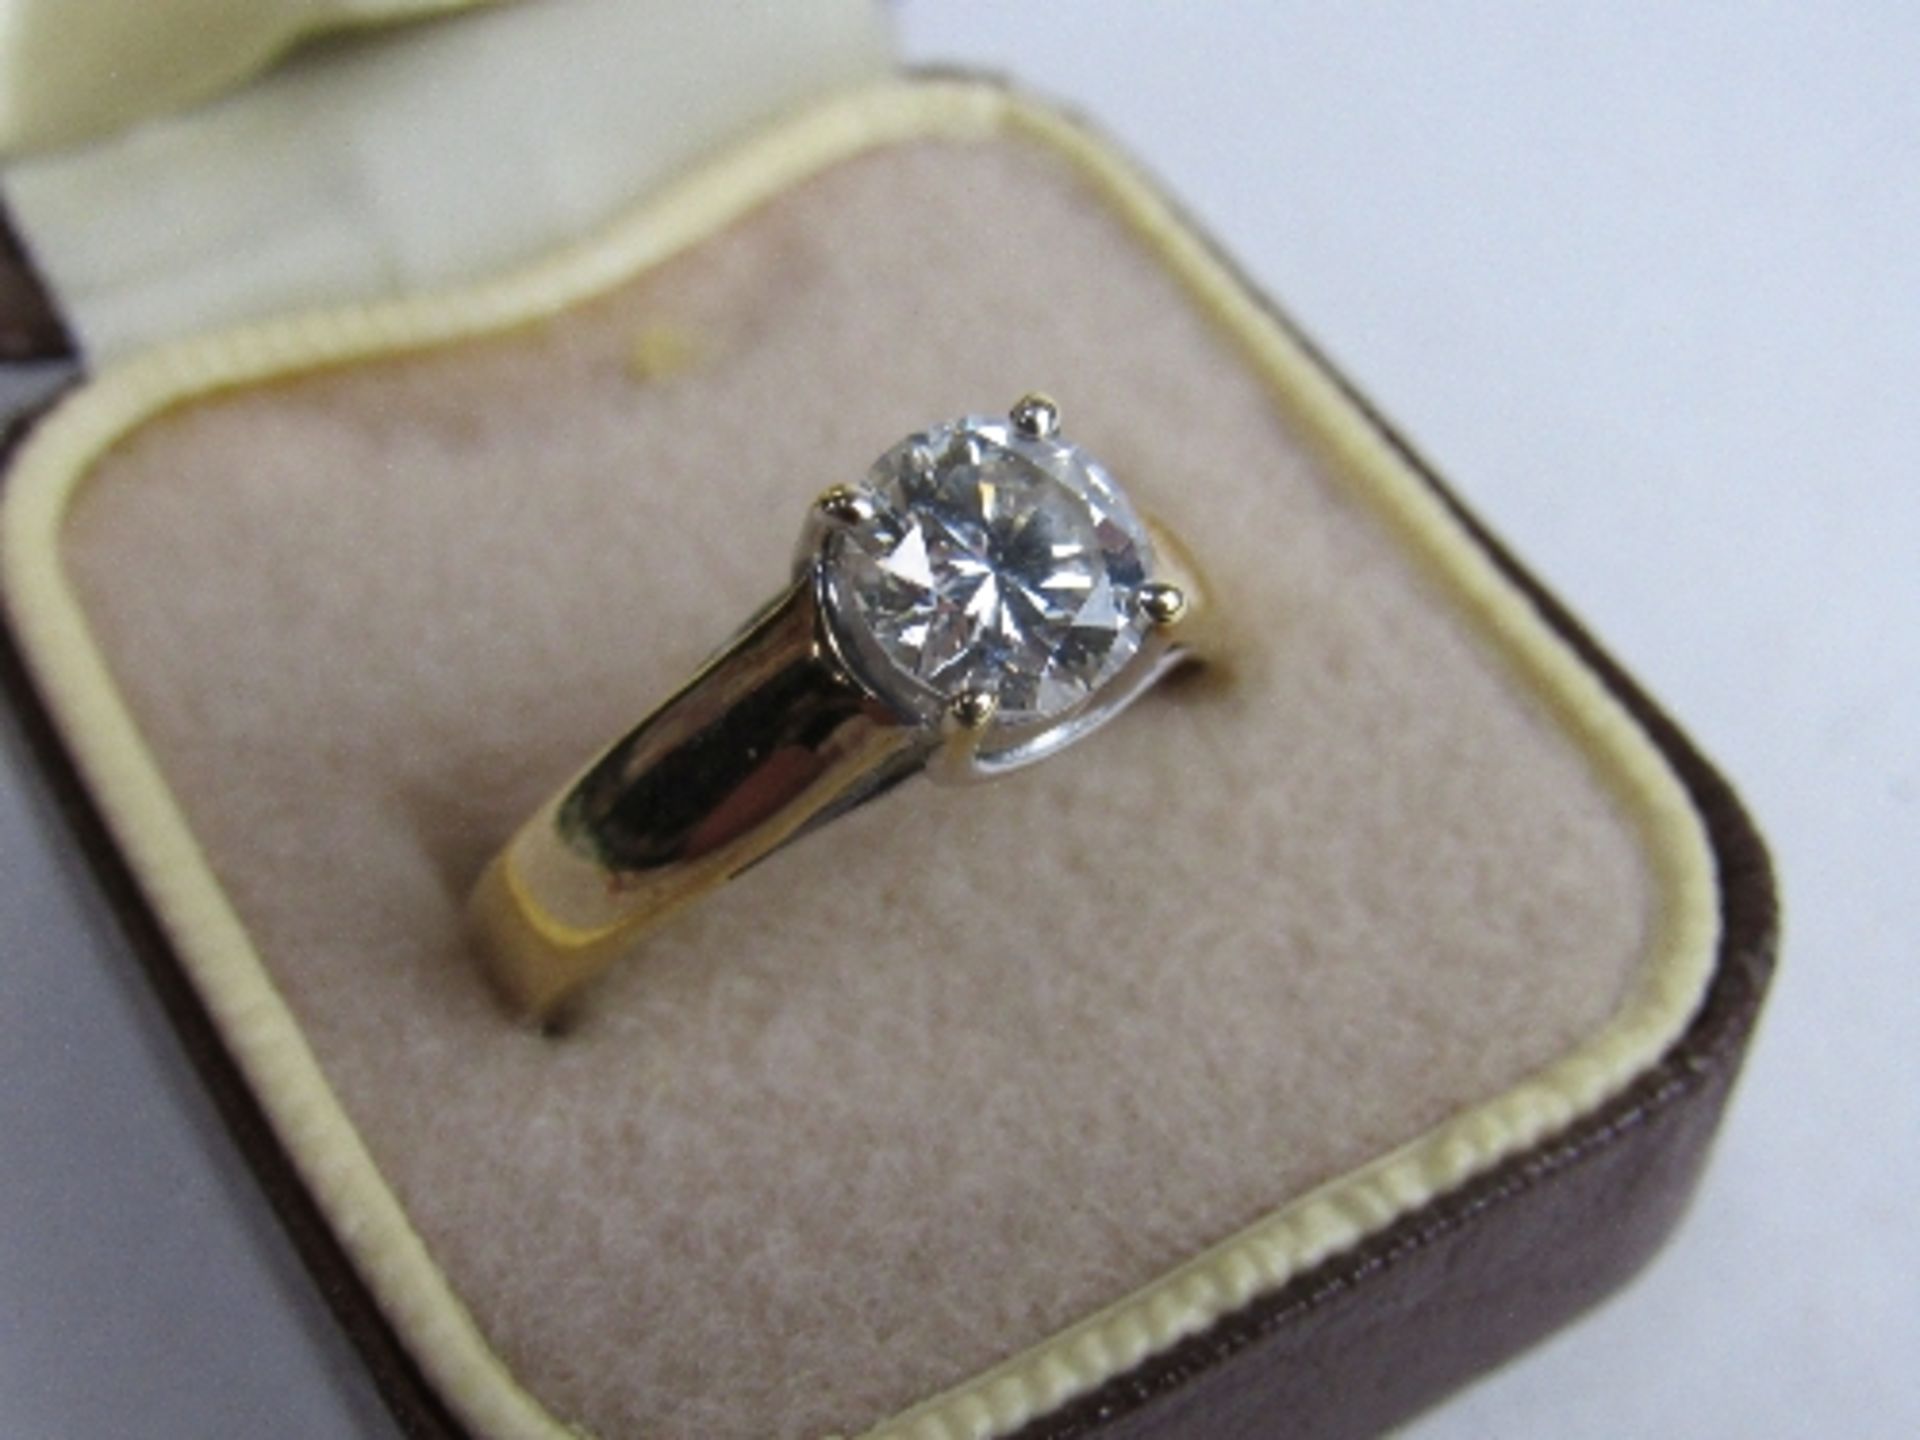 18ct gold & diamond solitaire ring, size S, wt 5.5gms. Price guide £750-850. - Image 4 of 4